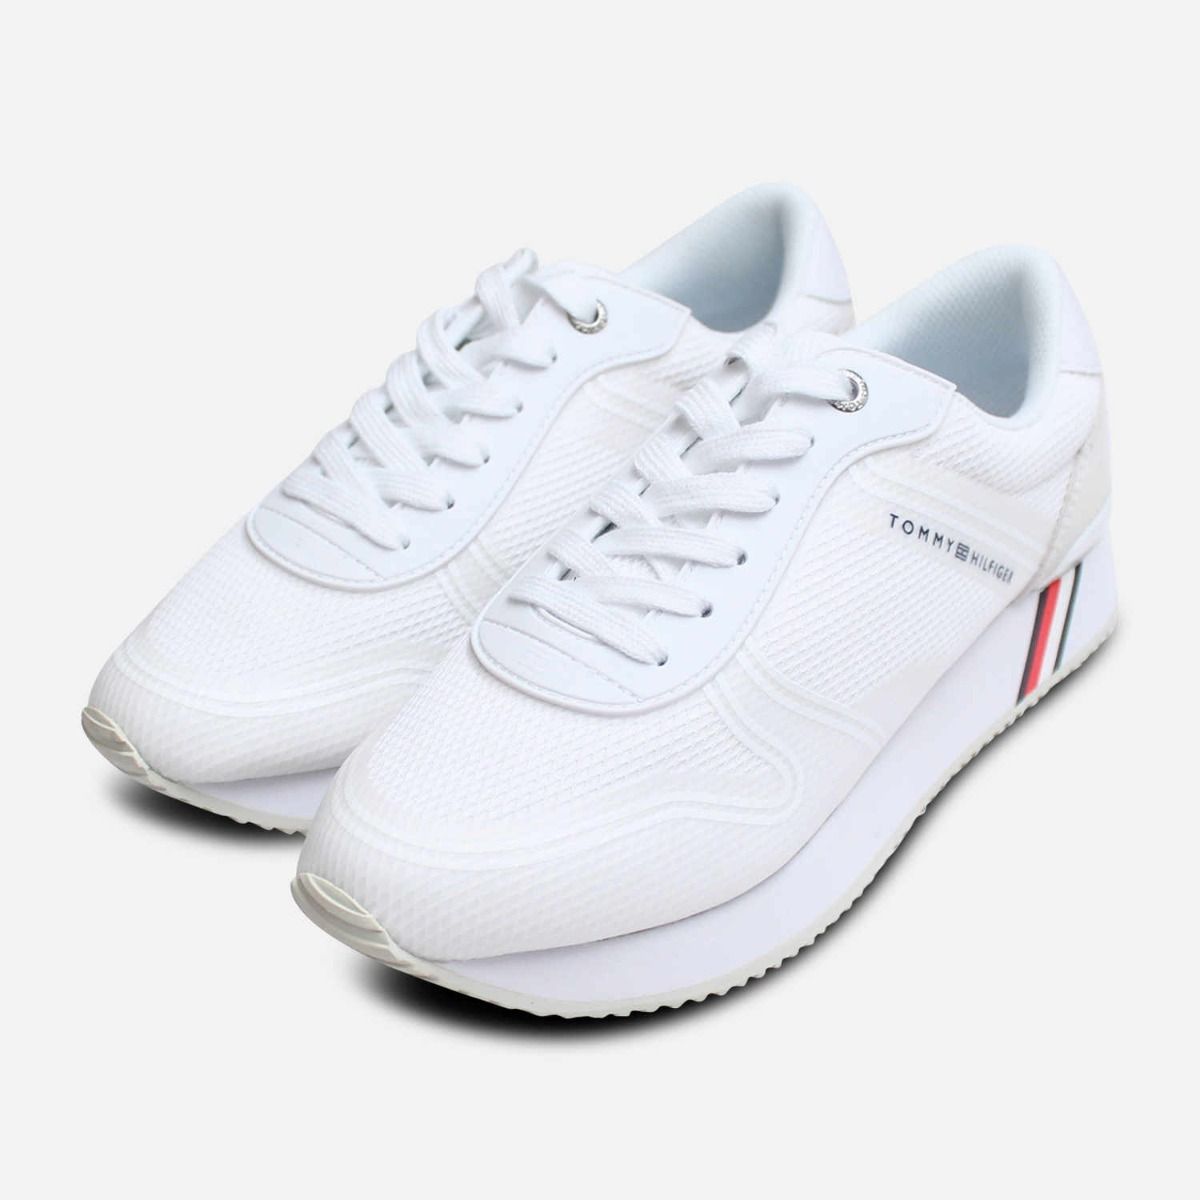 tommy hilfiger shoes women white